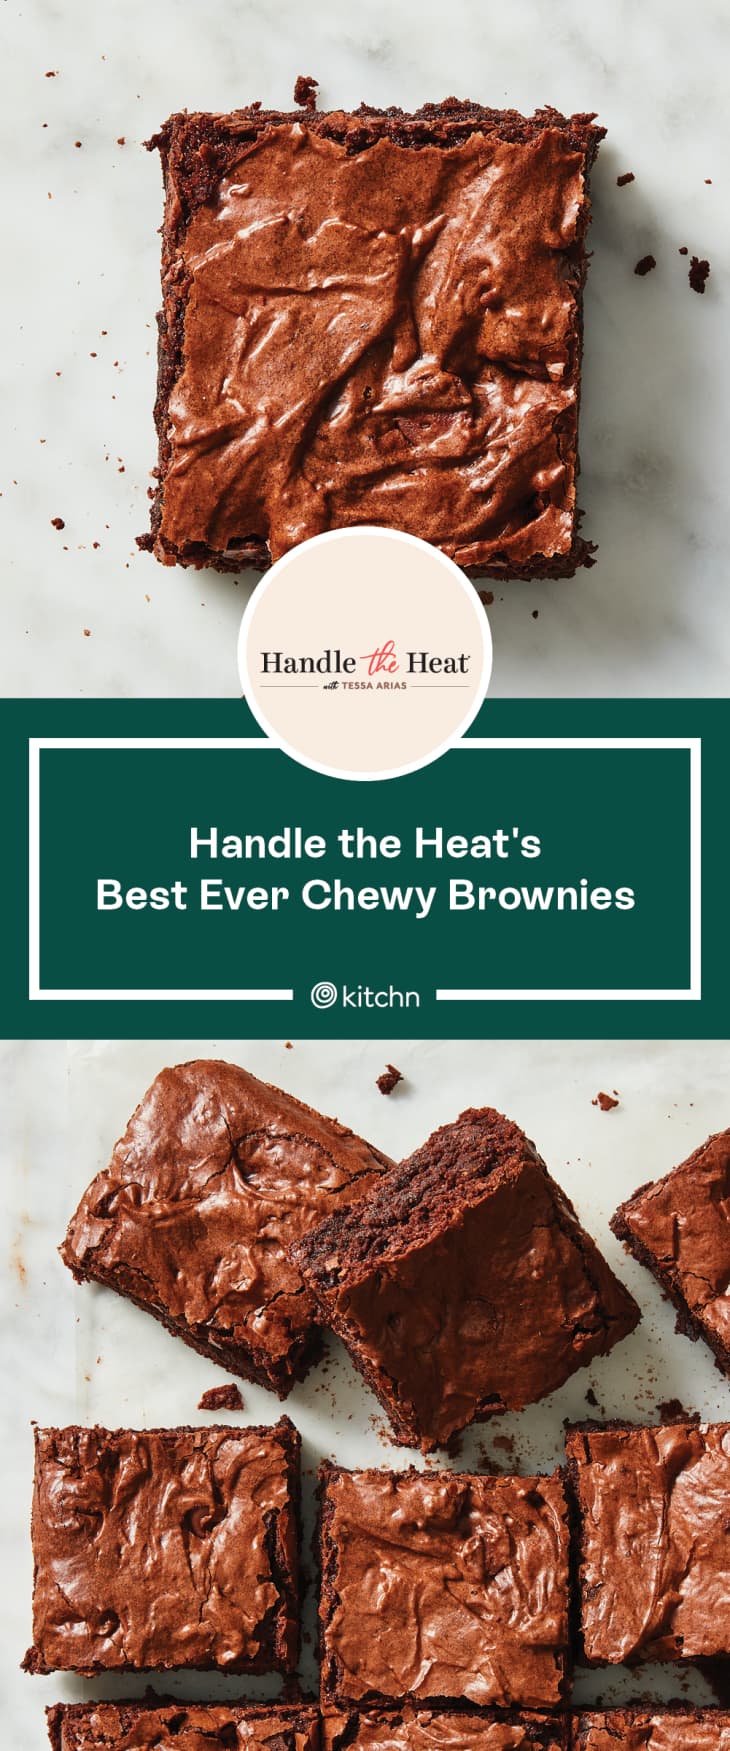 A graphic featuring overhead photos of a brownies made with Handle the Heat's recipe.